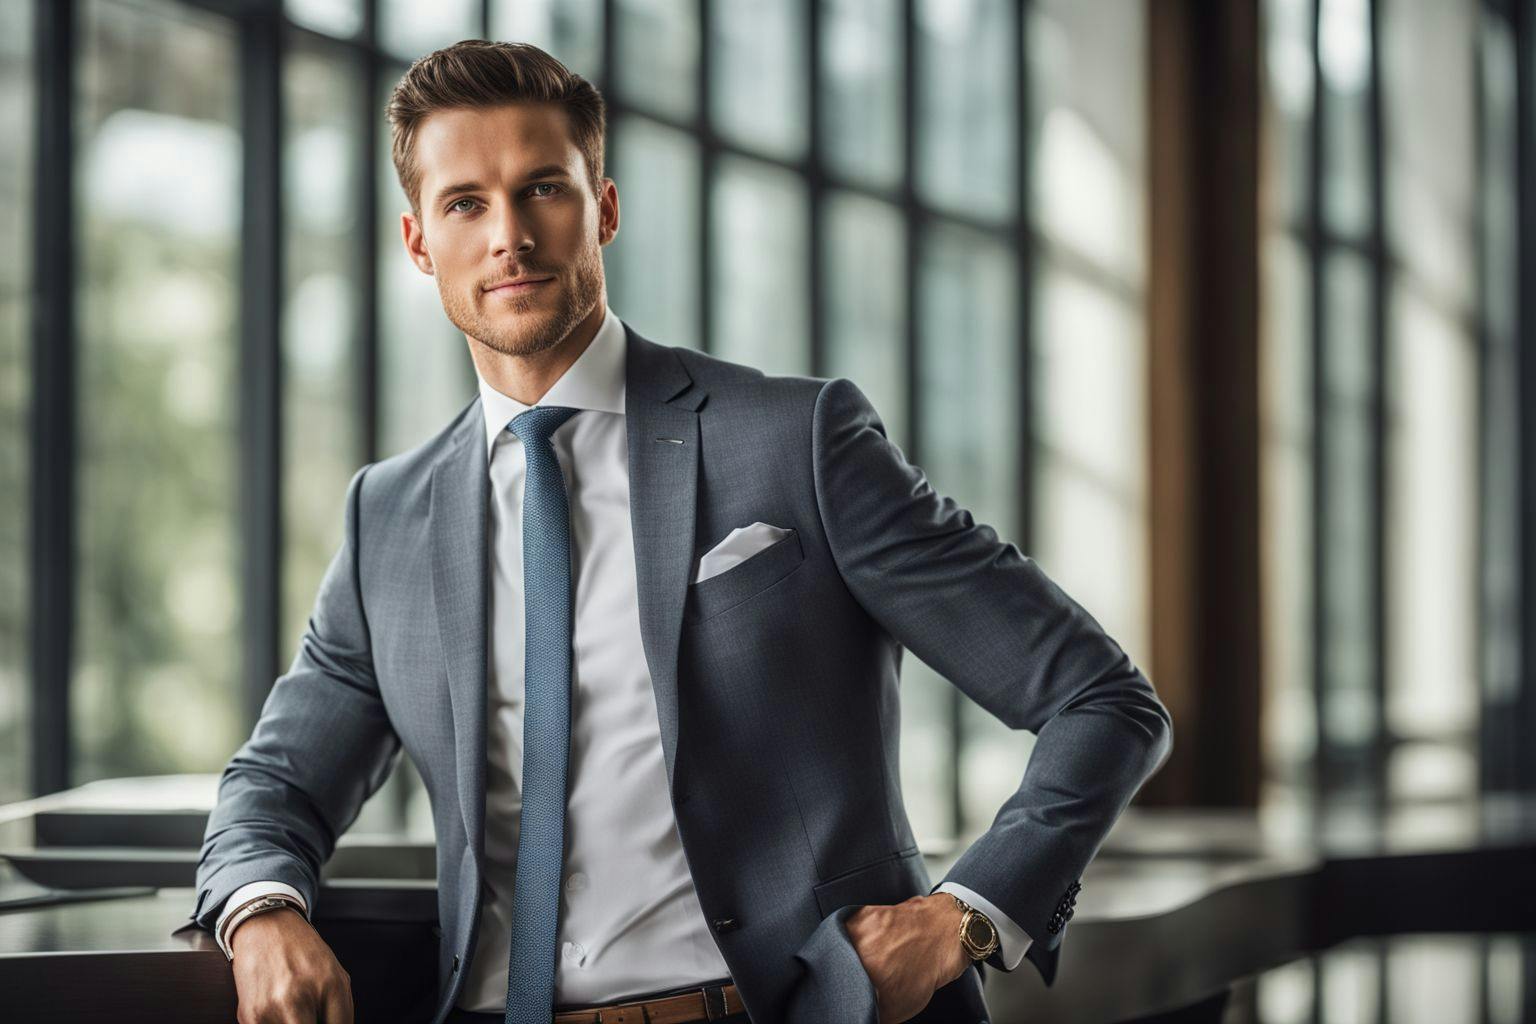 A well-dressed individual confidently posing for a self-taken corporate photoshoot in a professional indoor setting, lit by soft natural light creating a serious yet approachable atmosphere, shot in high resolution photographic style with a 35mm lens.